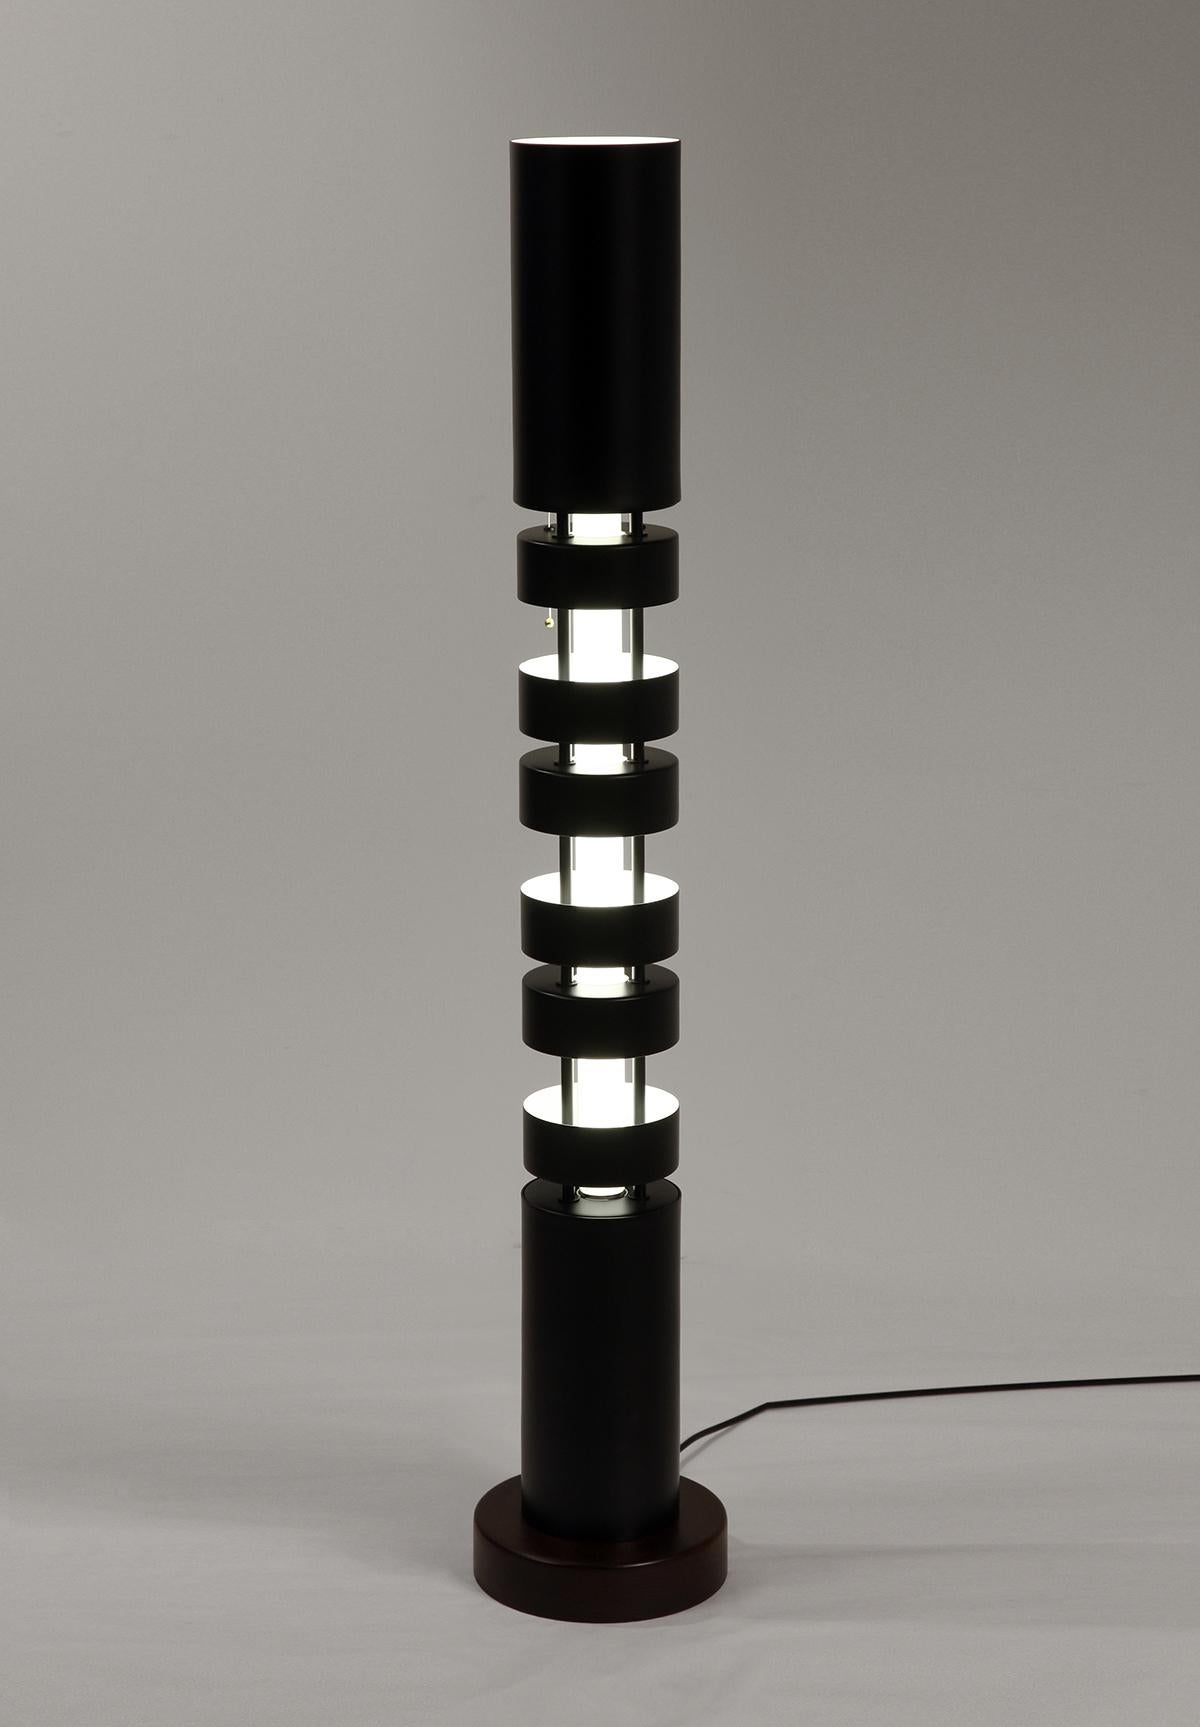 Floor lamp model 'Small Totem Column Lamp' designed by Serge Mouille in 1962.

Manufactured by Editions Serge Mouille in France. The production of lamps, wall lights and floor lamps are manufactured using craftsman’s techniques with the same